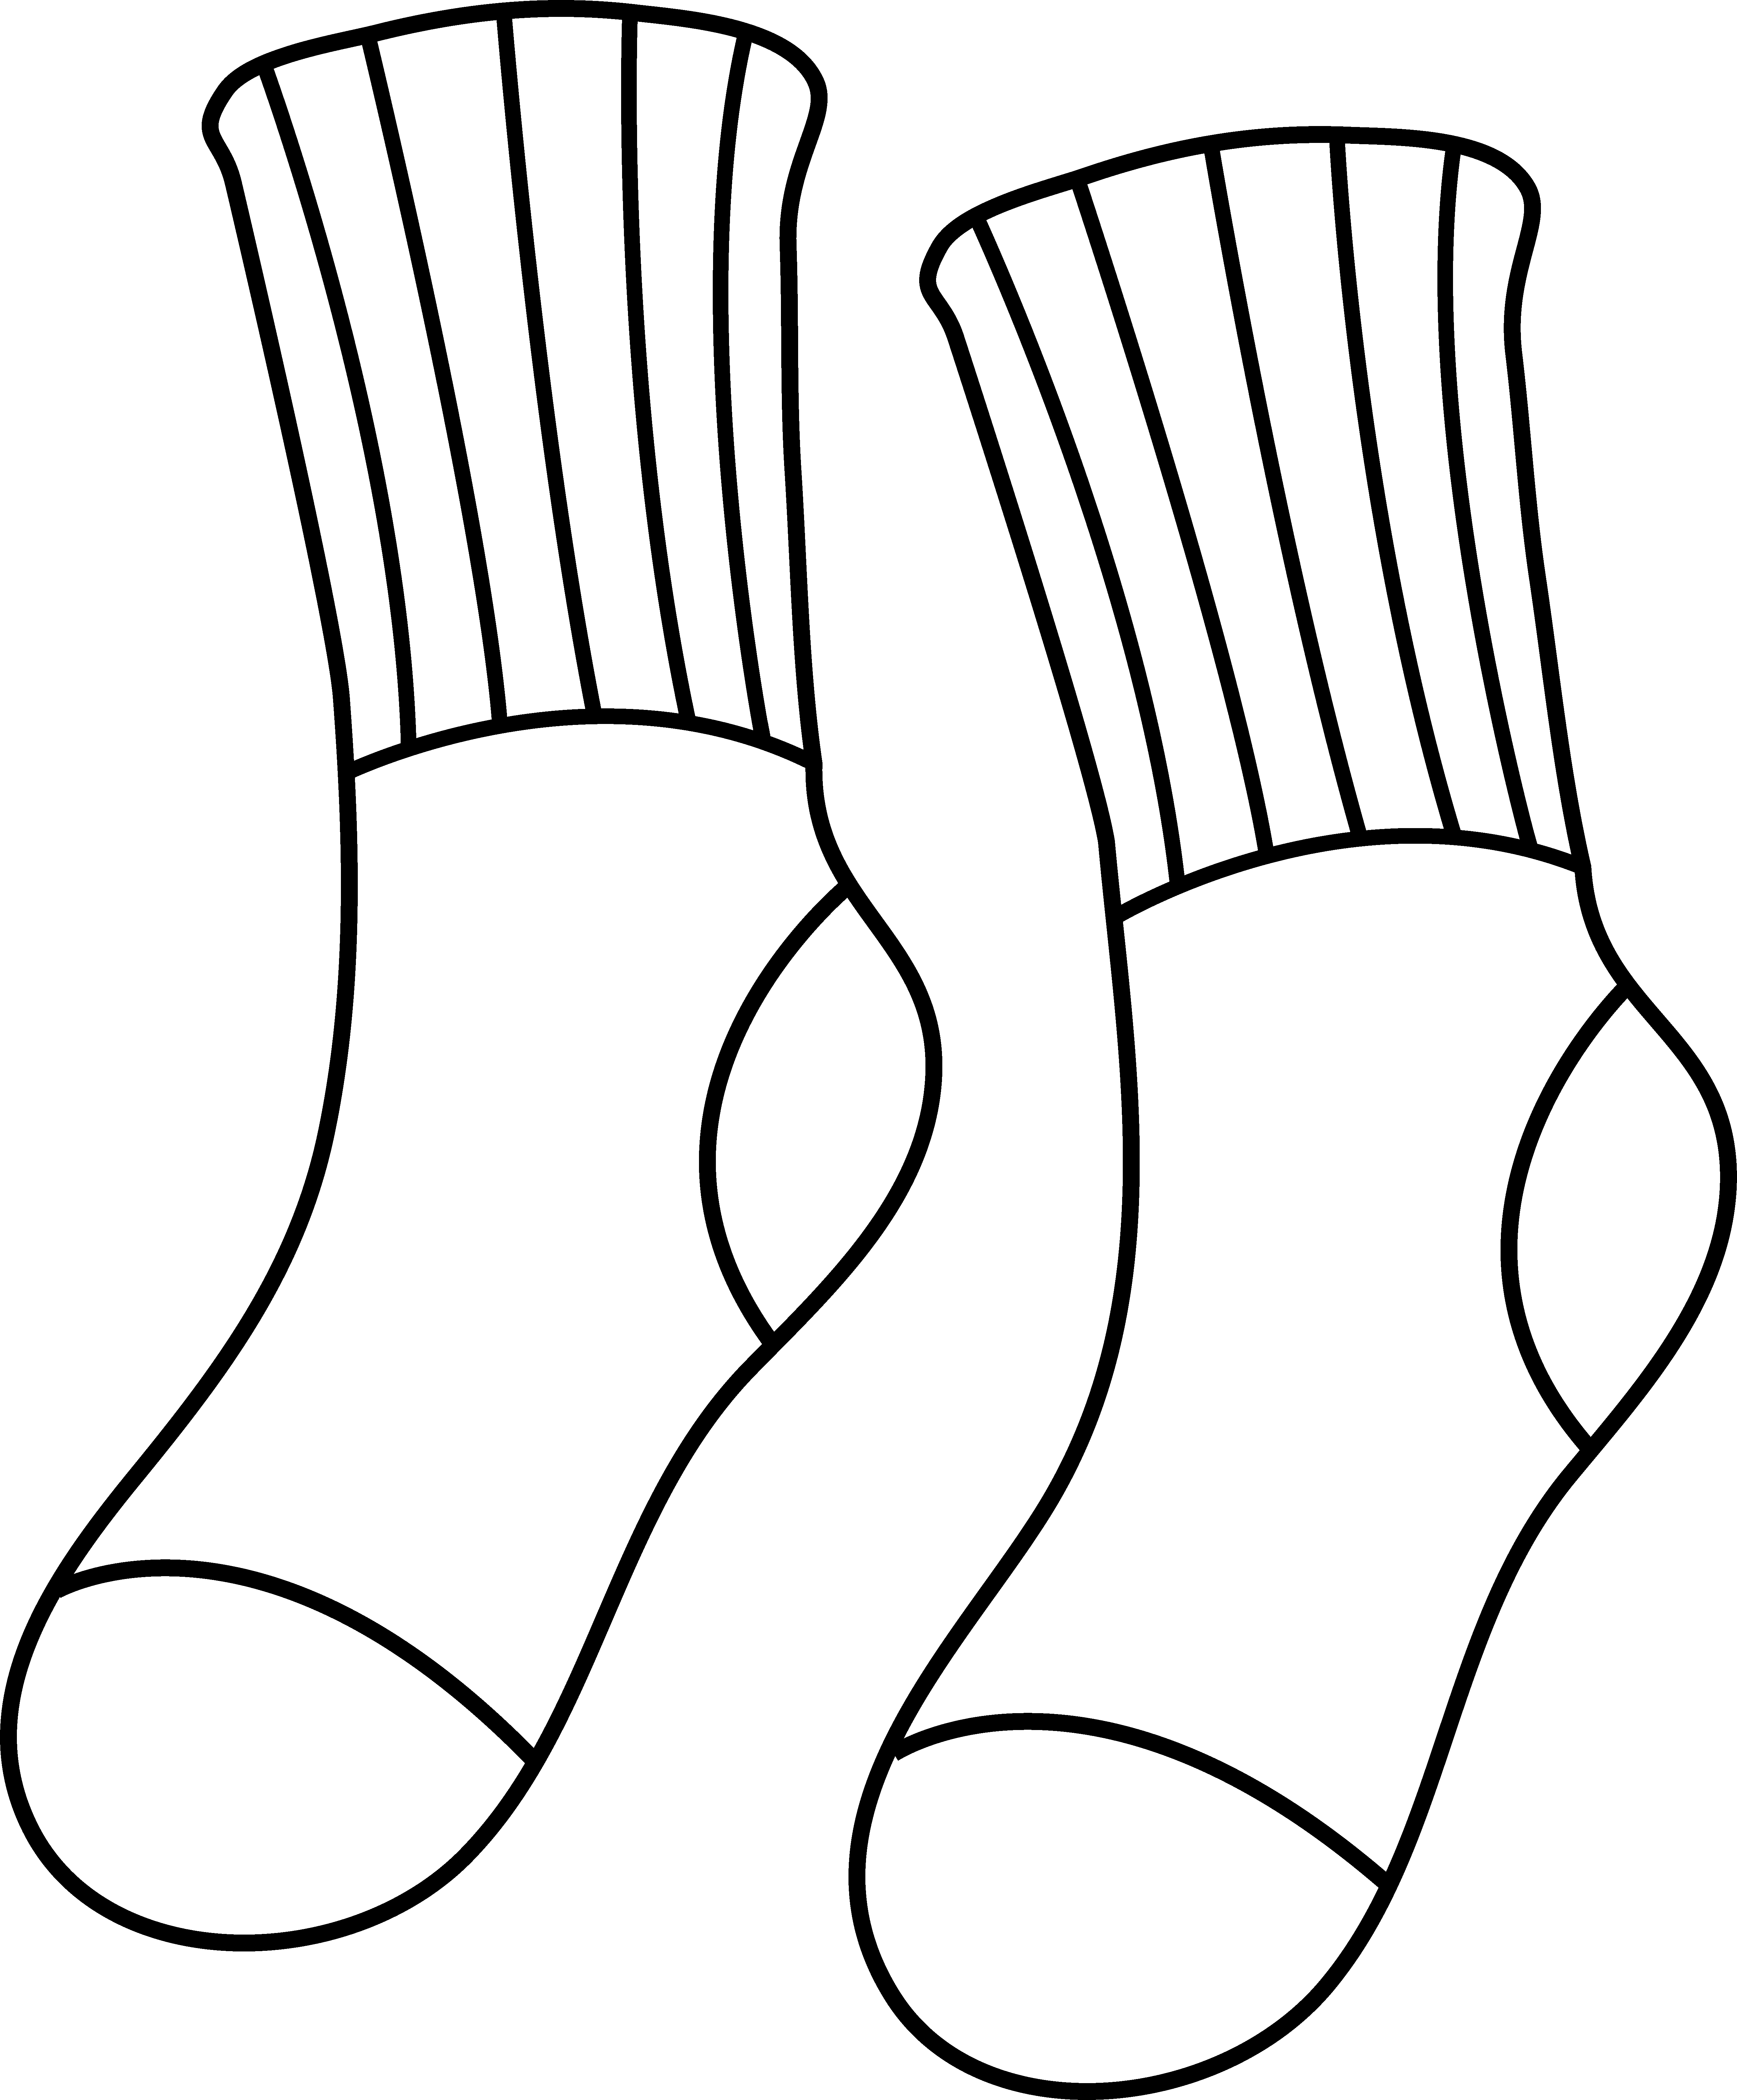 Socks coloring page colorable socks outline socks drawing free printable coloring pages coloring pages